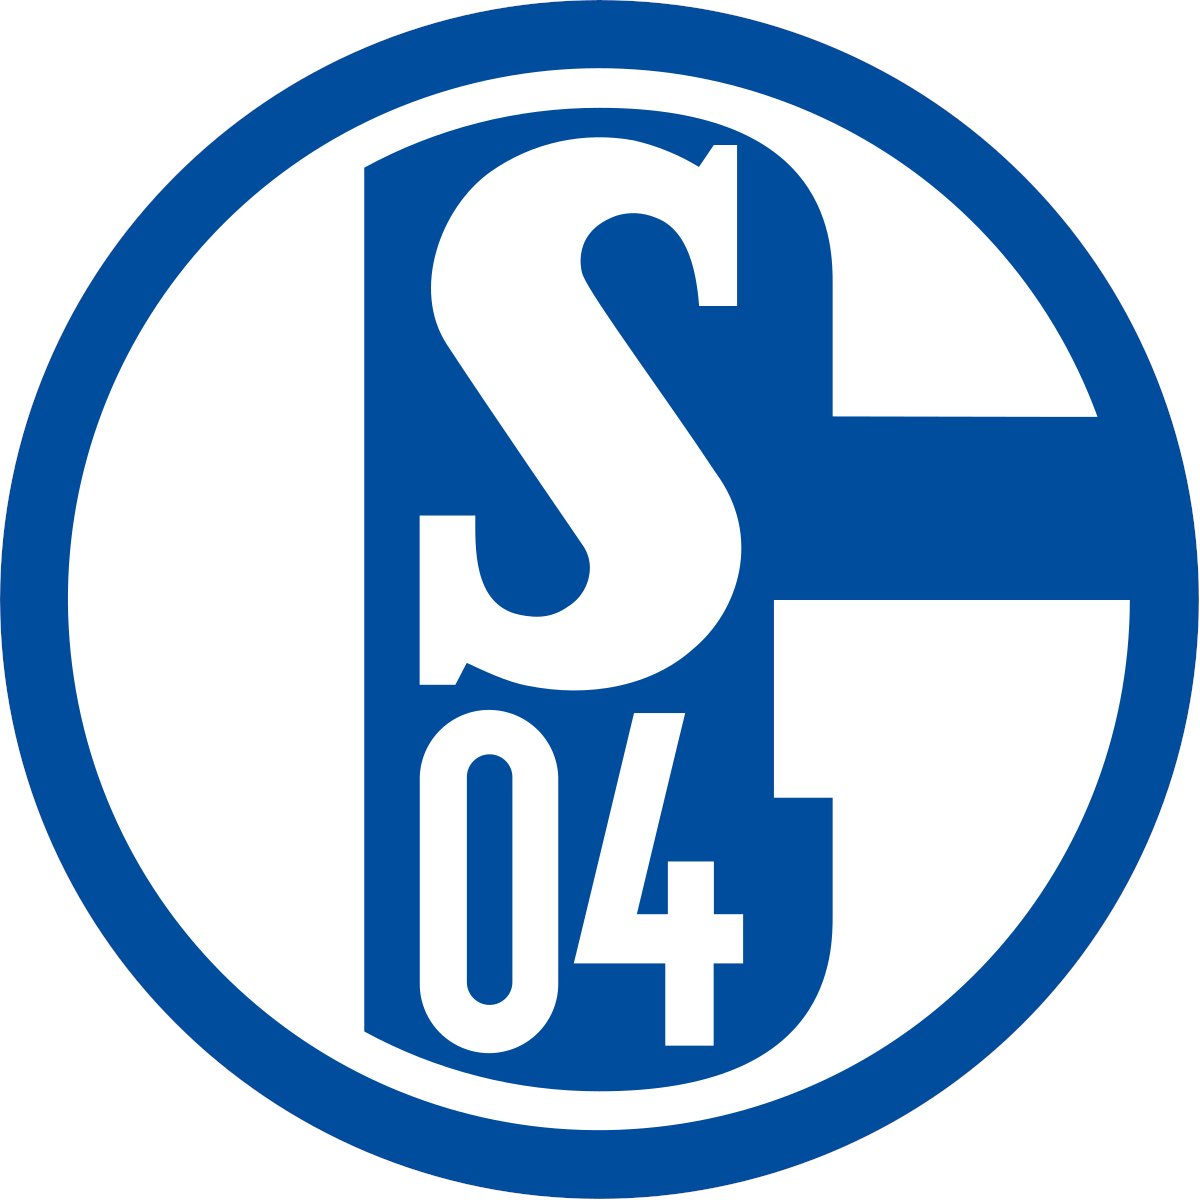 English side: ArsenalGerman side: Schalke 04Great stadium, decent enough team, but never troubling the big boys any more. Both had high coach turnover in recent years. Schalke currently under David Wagner, formerly of Huddersfield, which shows their slump. #AFC  #Gunners